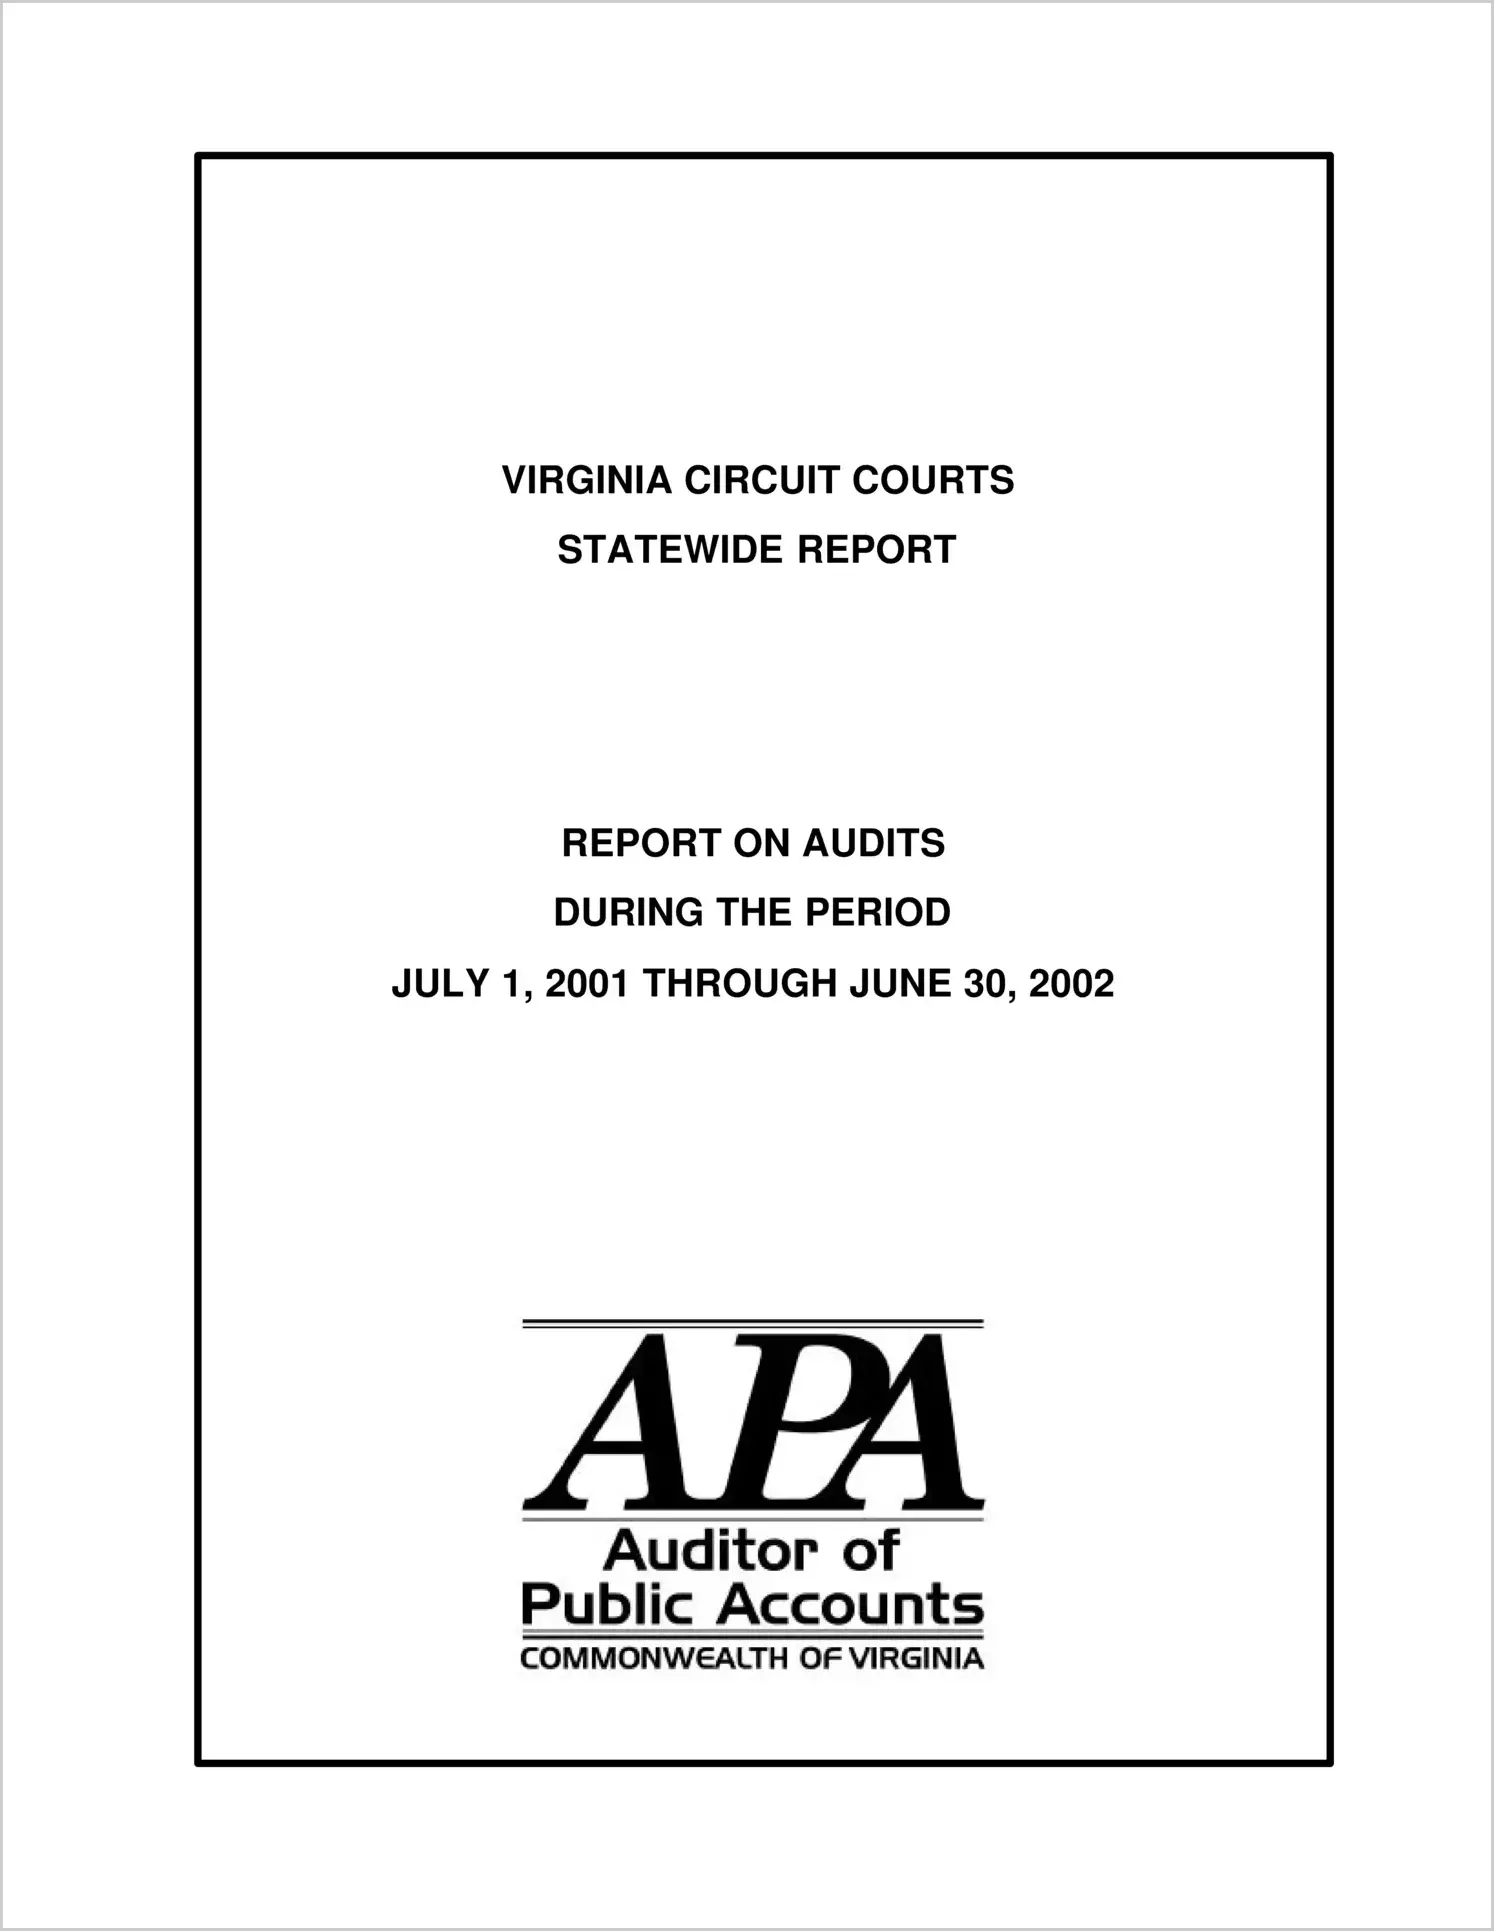 Virginia Circuit Courts Statewide Report during the period July 1, 2001 through June 30, 2002